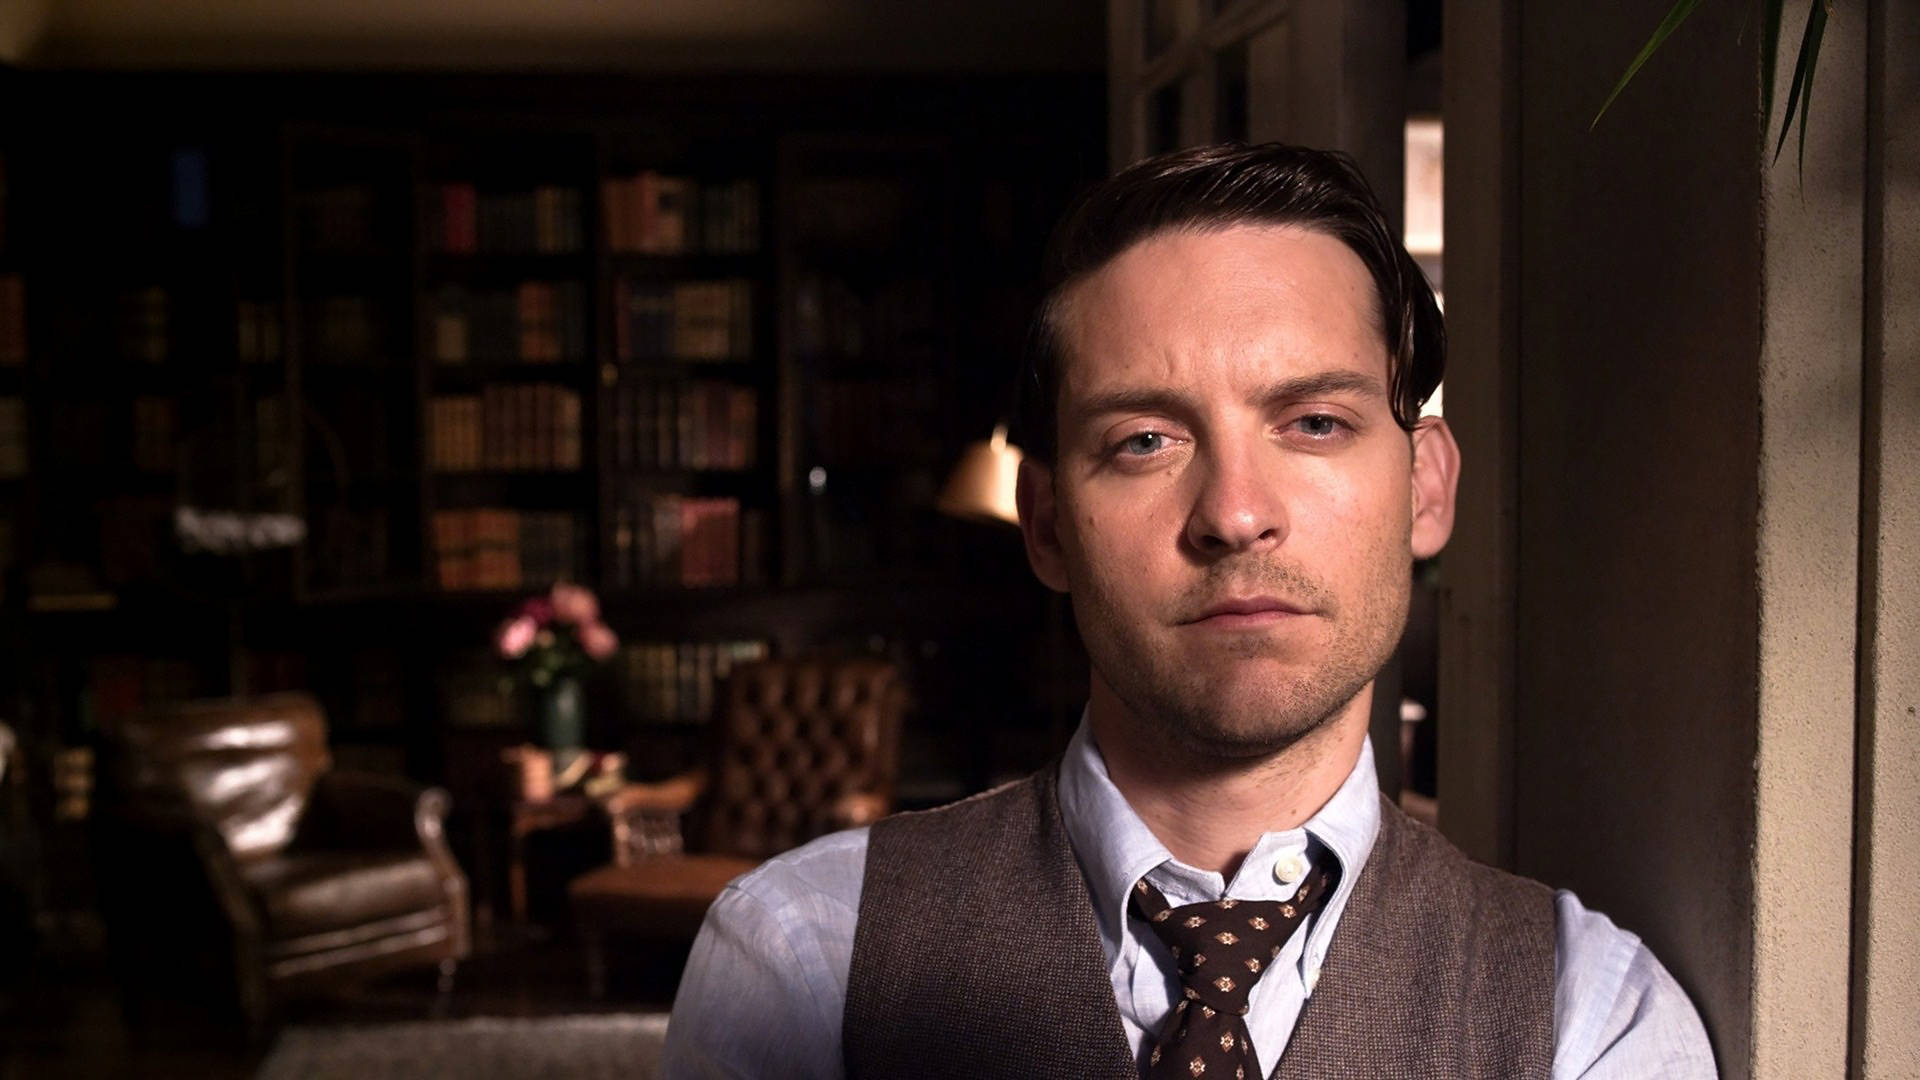 Tobey Maguire embodying Nick Carraway's character in the movie scene. Wallpaper